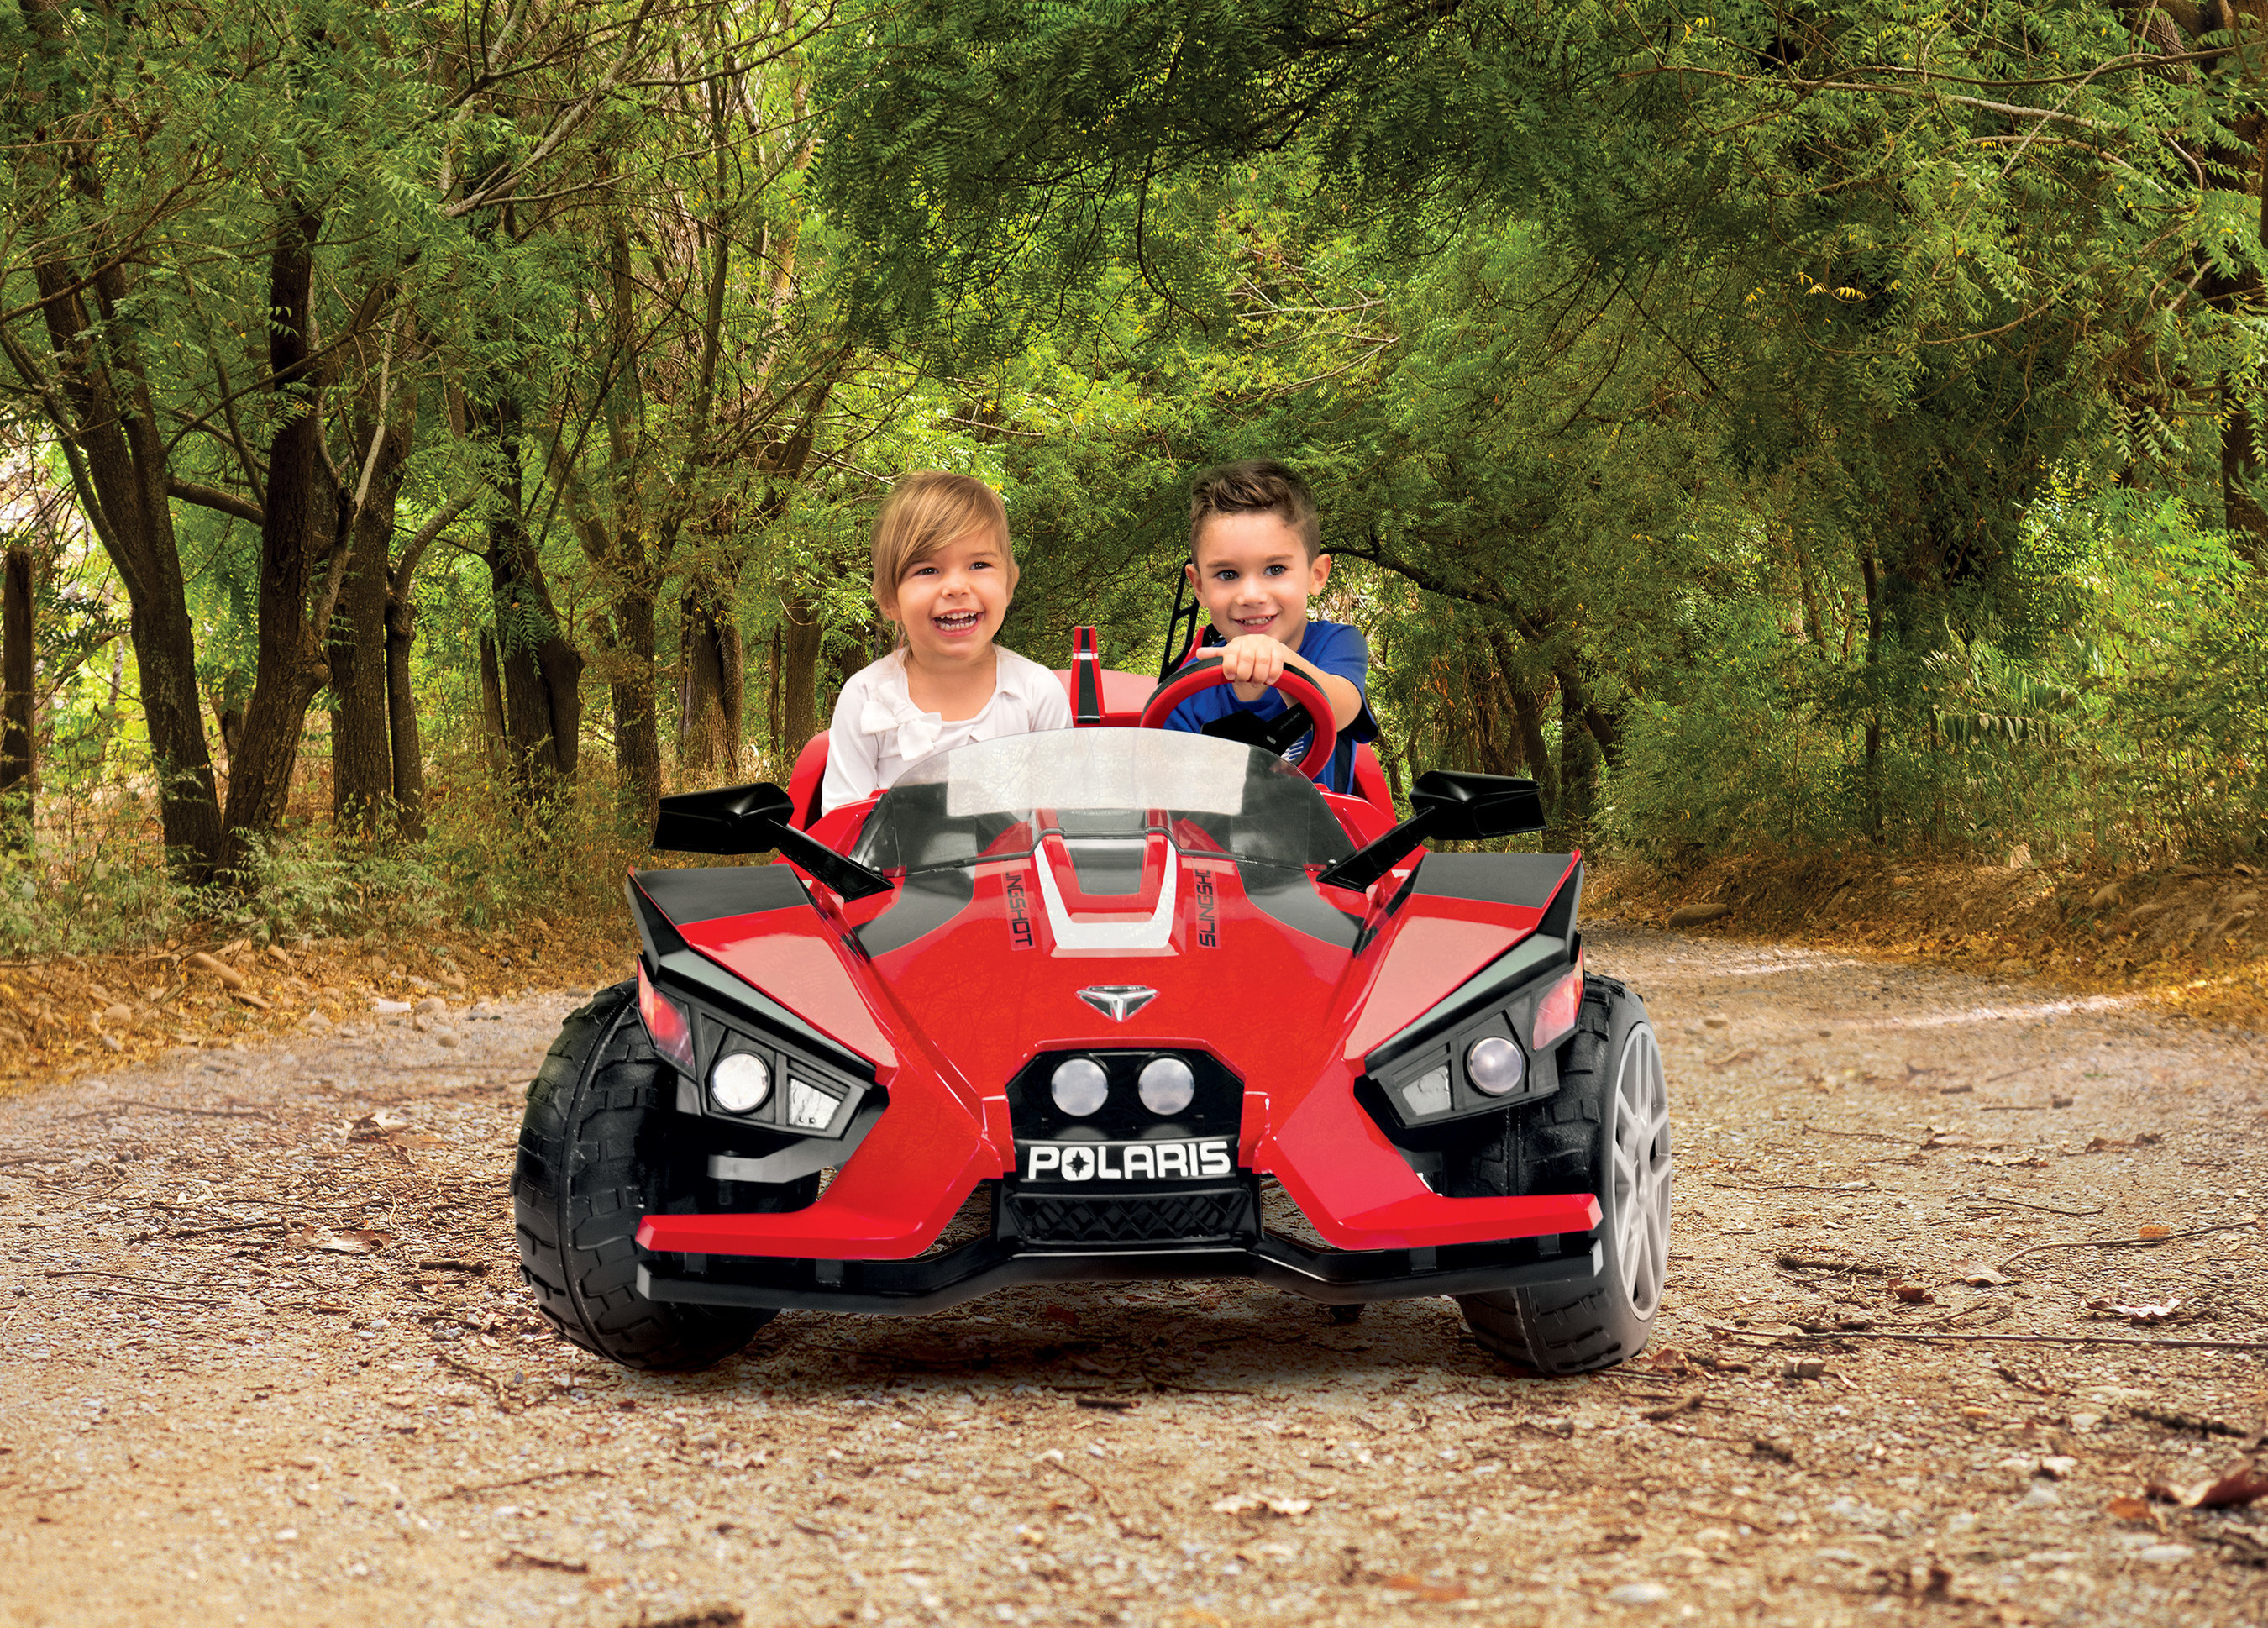 Peg Perego Launches New 12volt Polaris Slingshot, unit will be made in the USA.